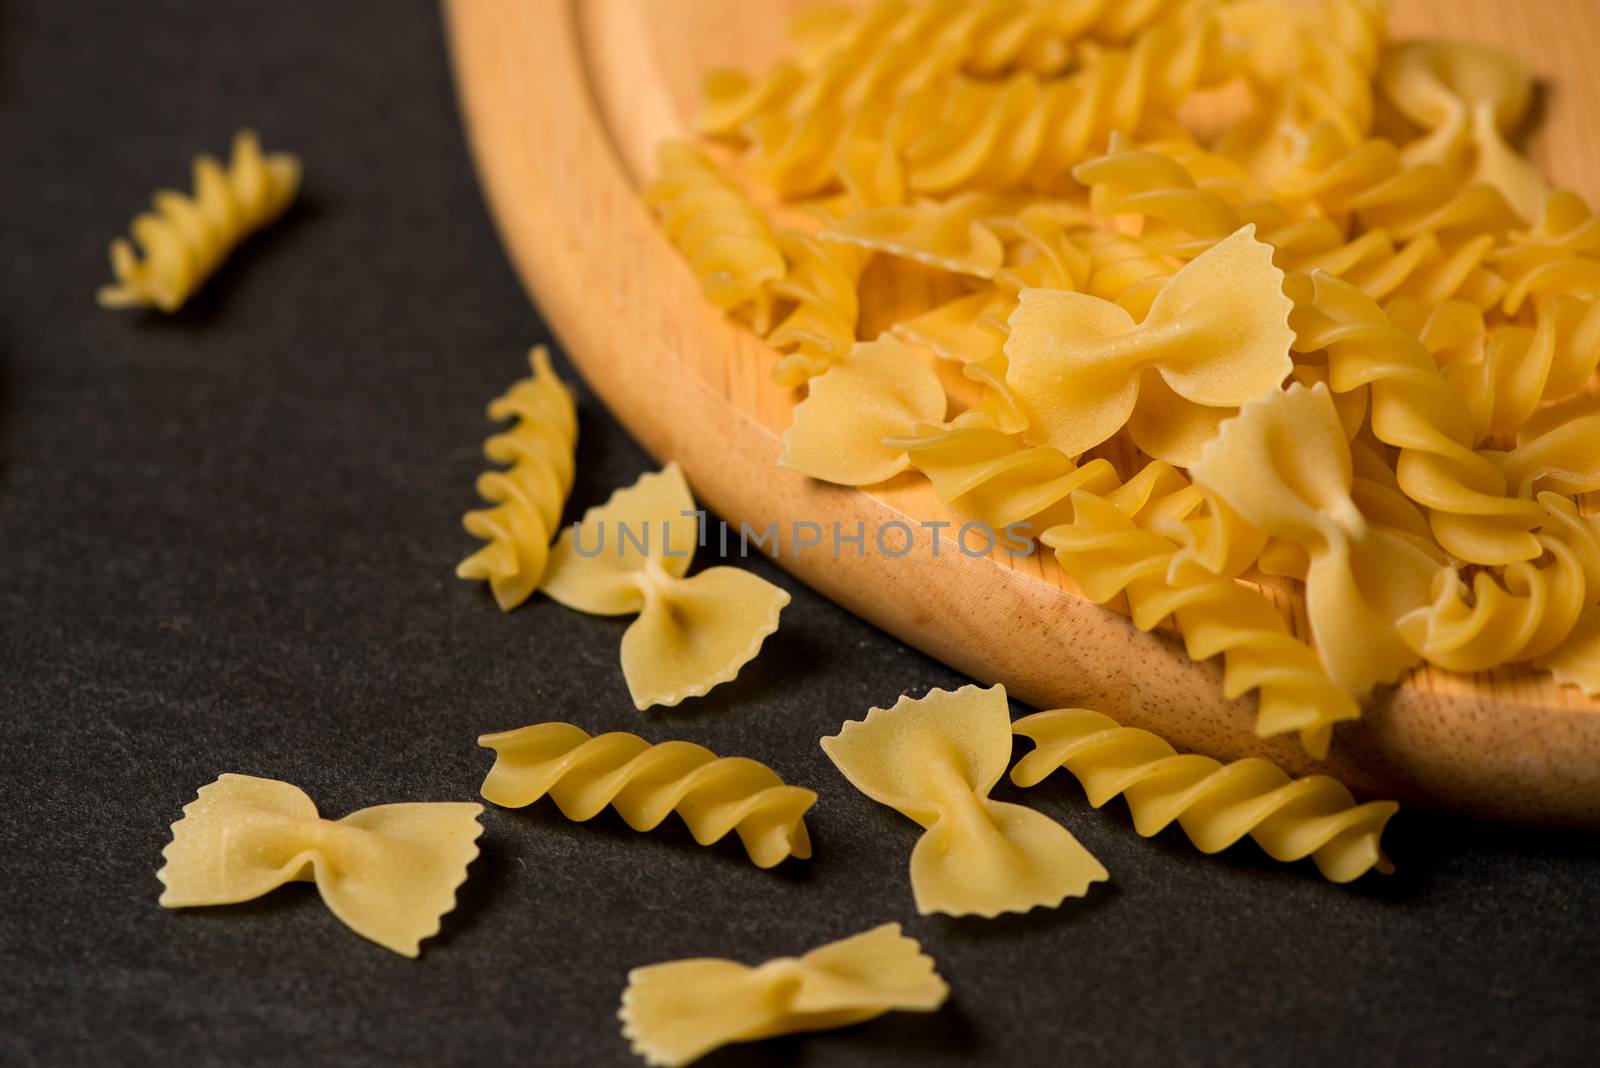 Variety of types and shapes of dry Italian pasta on dark background